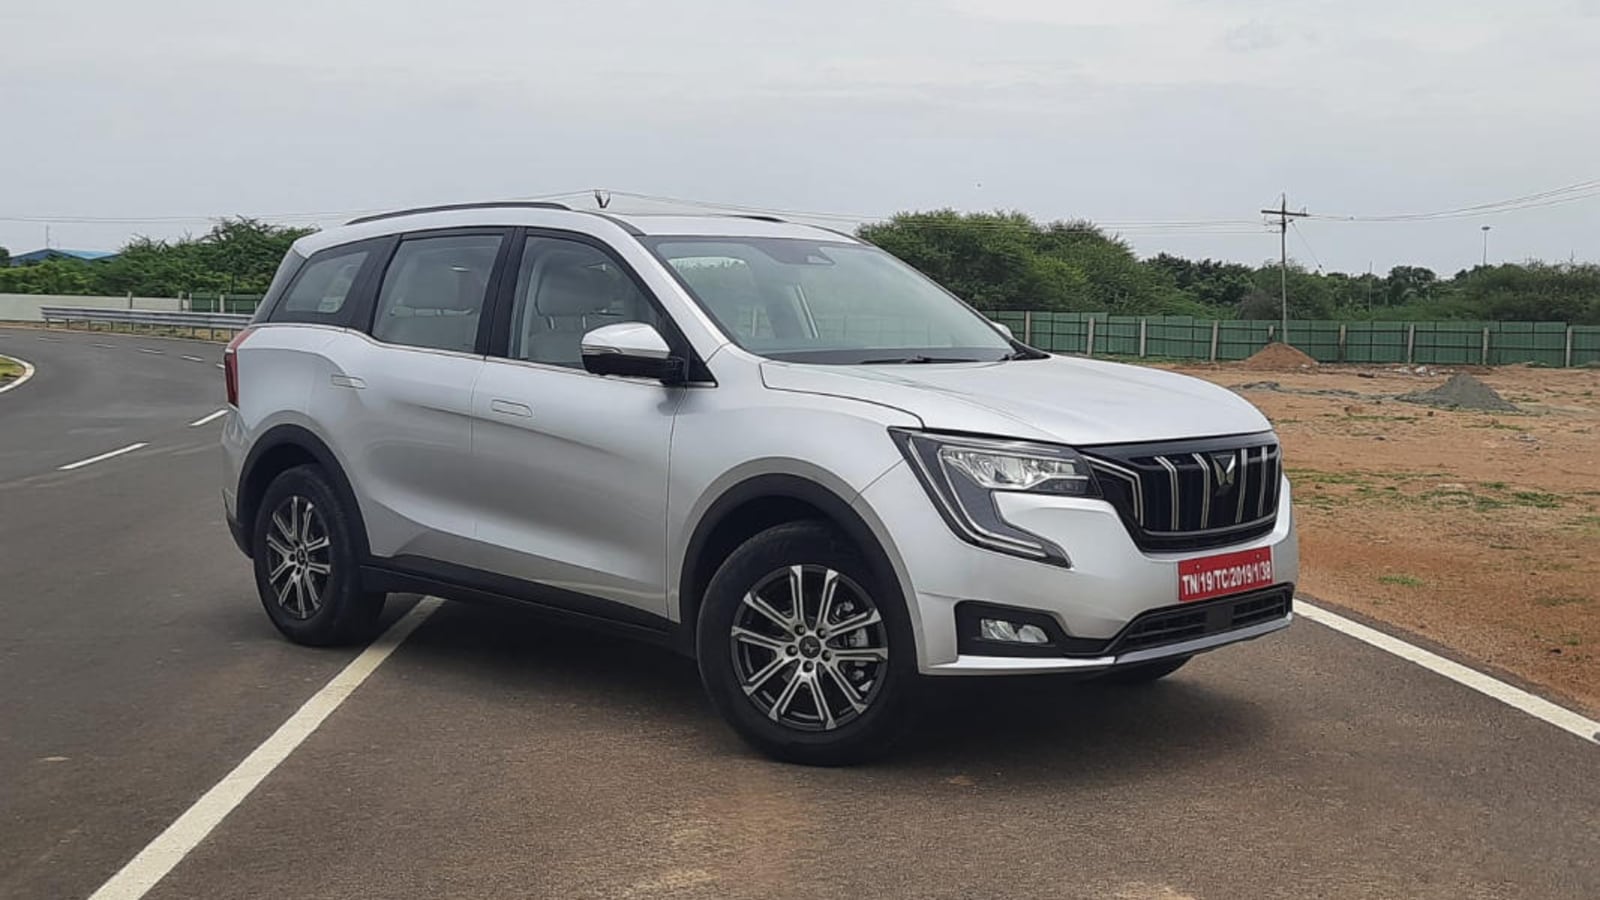 In Pics: Mahindra XUV700 SUV: Detailed Image Gallery of Design, Features and More